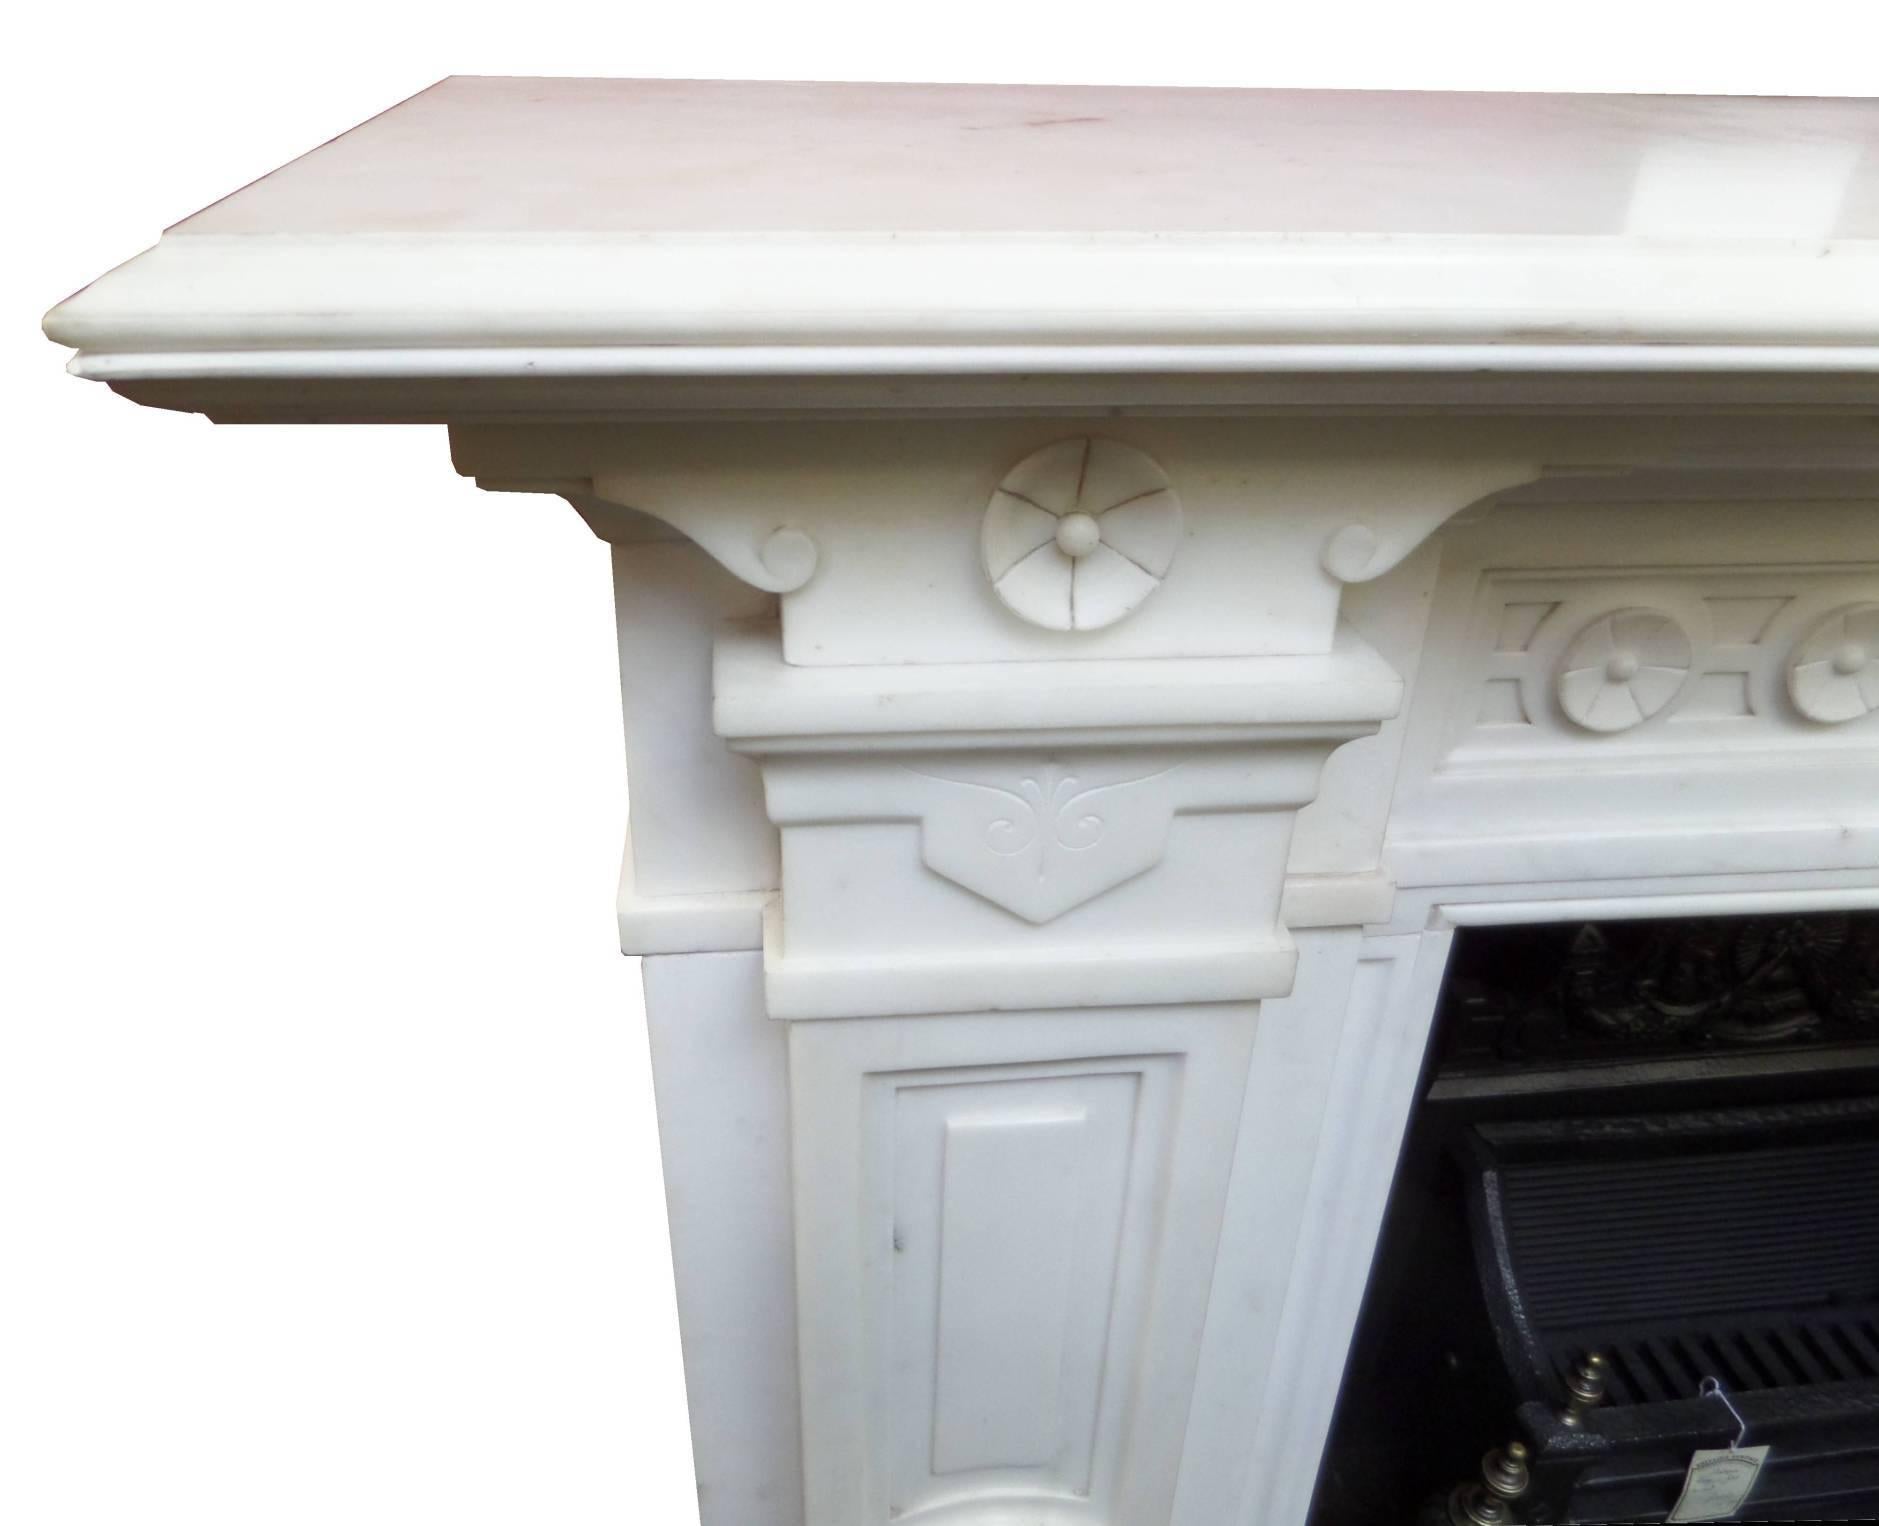 Antique restored grand statuary marble surround. This impressive antique surround is believed to have originated from the original Normanton Hall in Rutland, England. It boasts a double molded 77 x 16 inch shelf with impressive carved central tablet